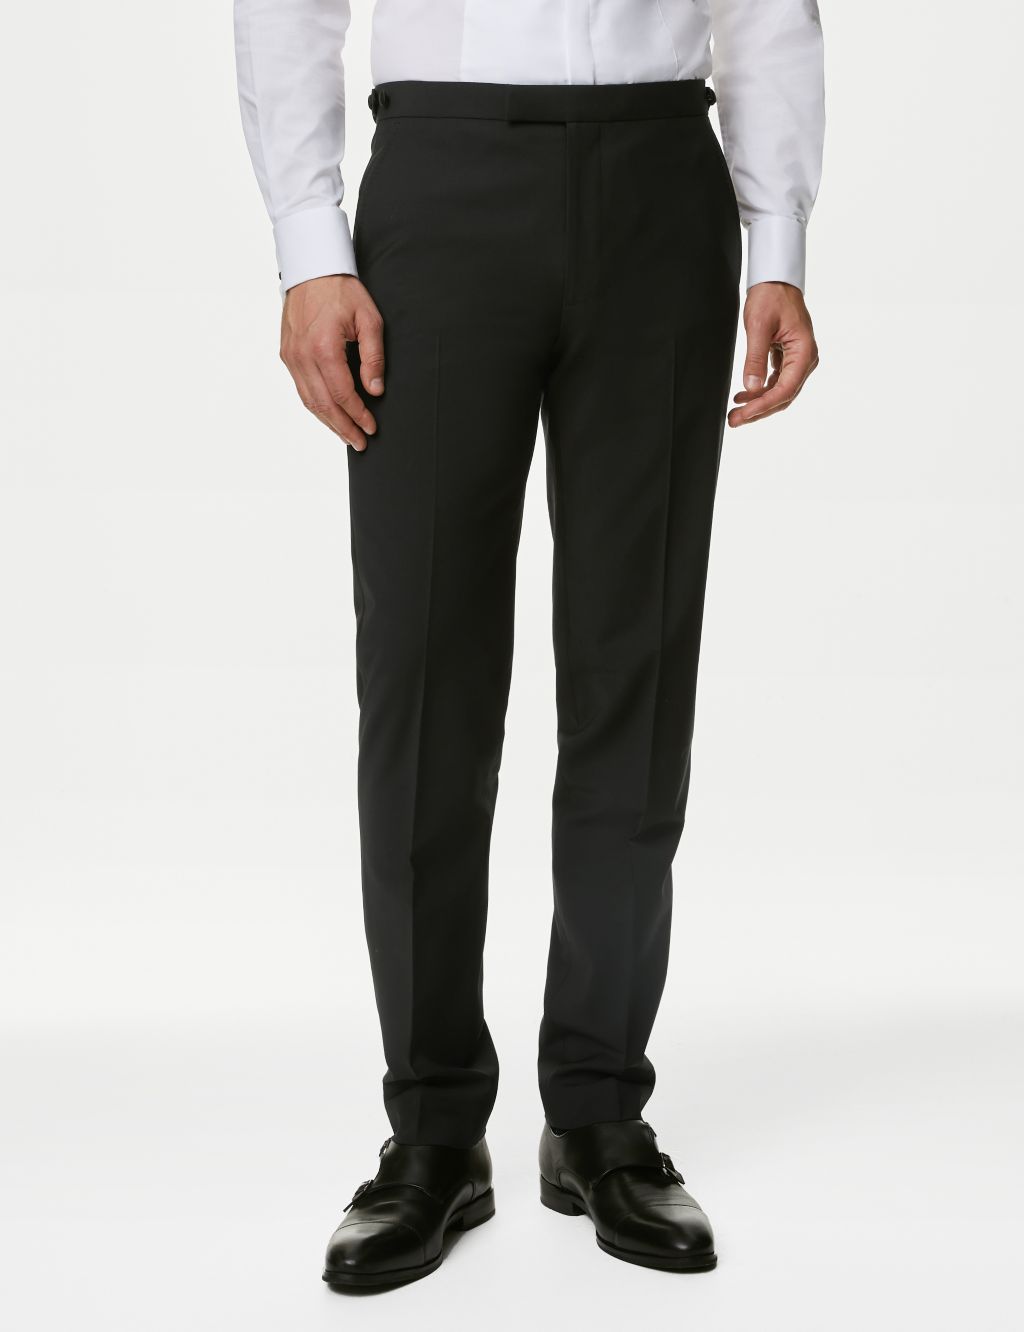 The Ultimate Tailored Fit Tuxedo Suit image 4